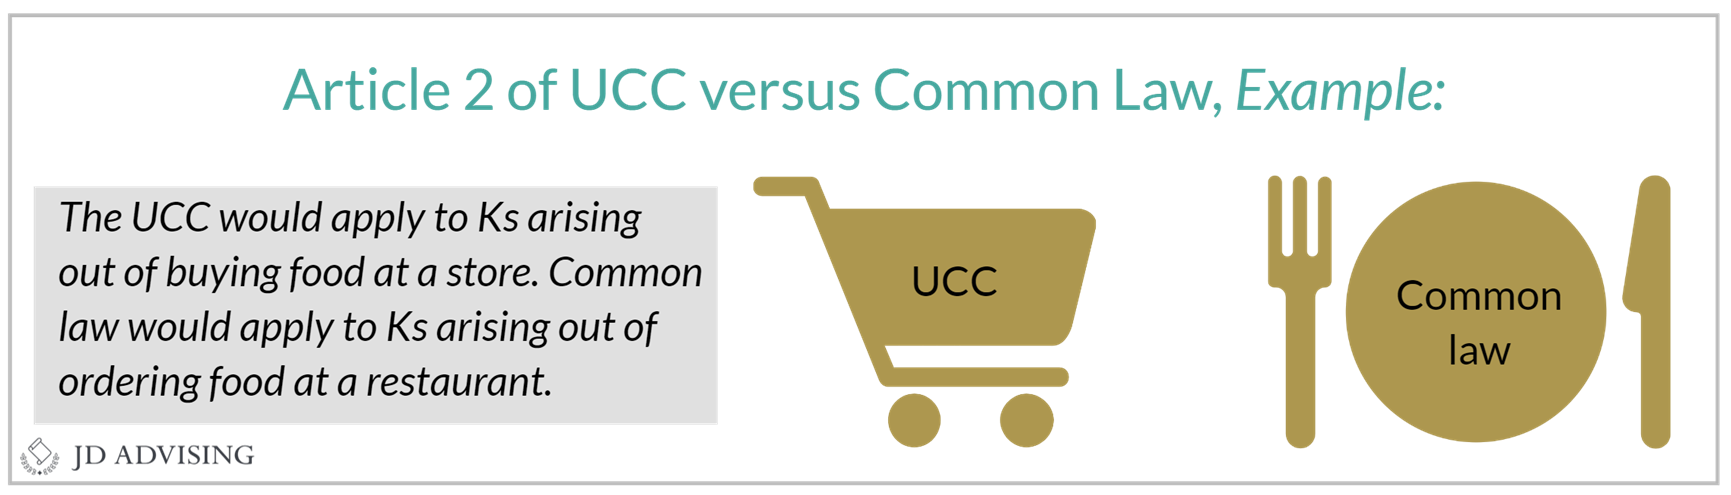 Article 2 of the UCC or the common law applies